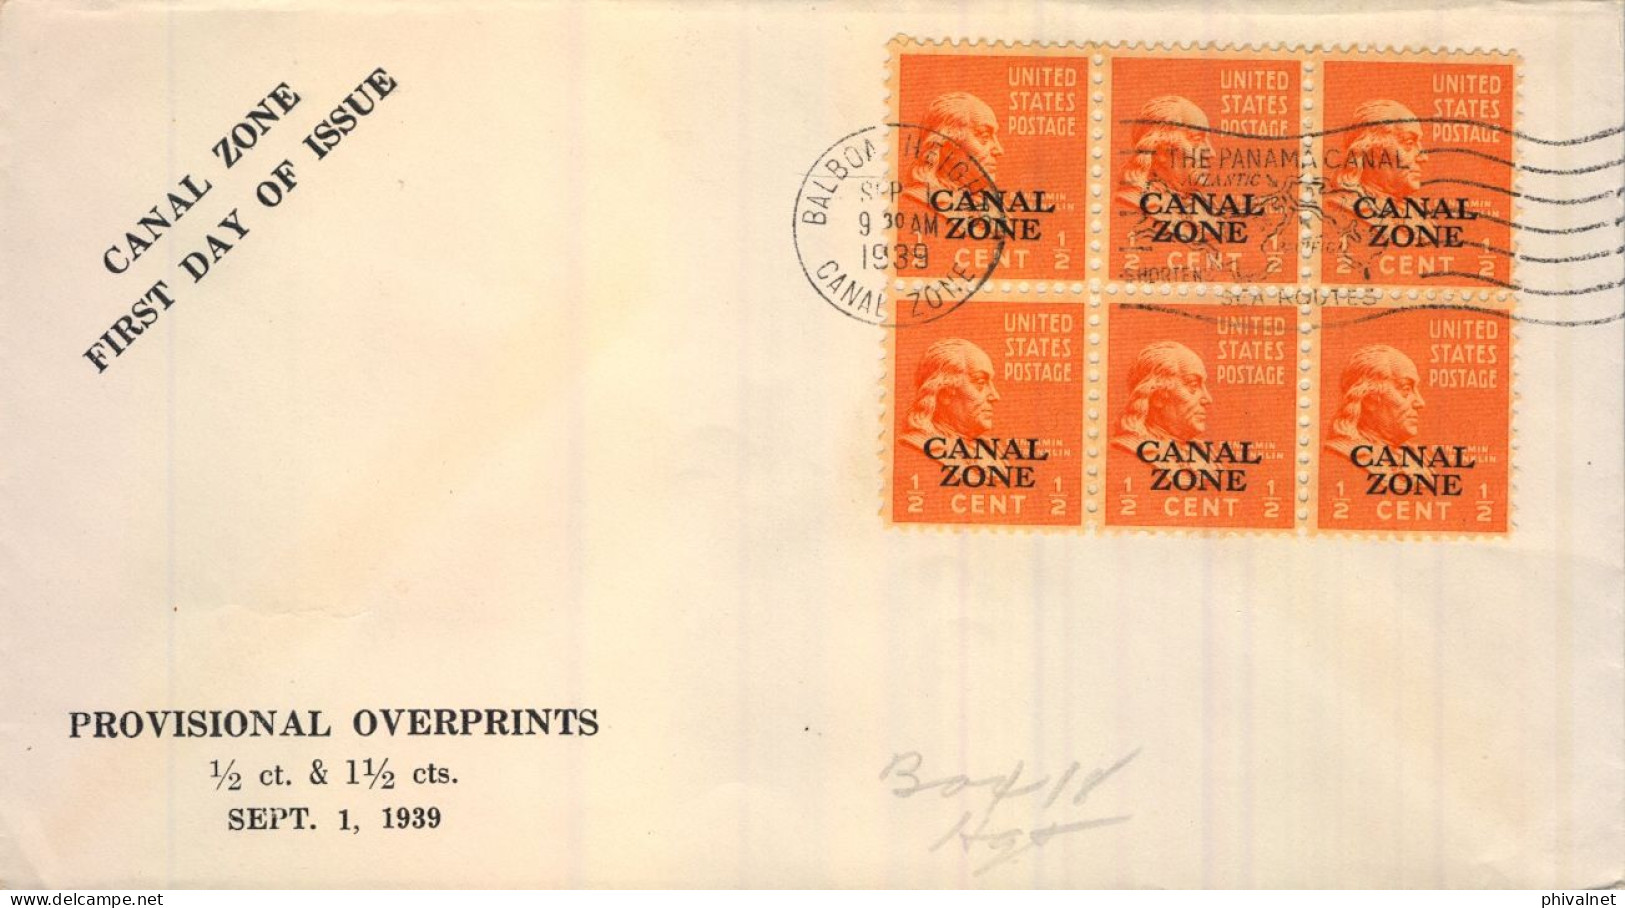 1939 CANAL ZONE , BALBOA HEIGHTS , PRIMER DIA , FIRST DAY COVER , YV. 104 BL/6 - Canal Zone